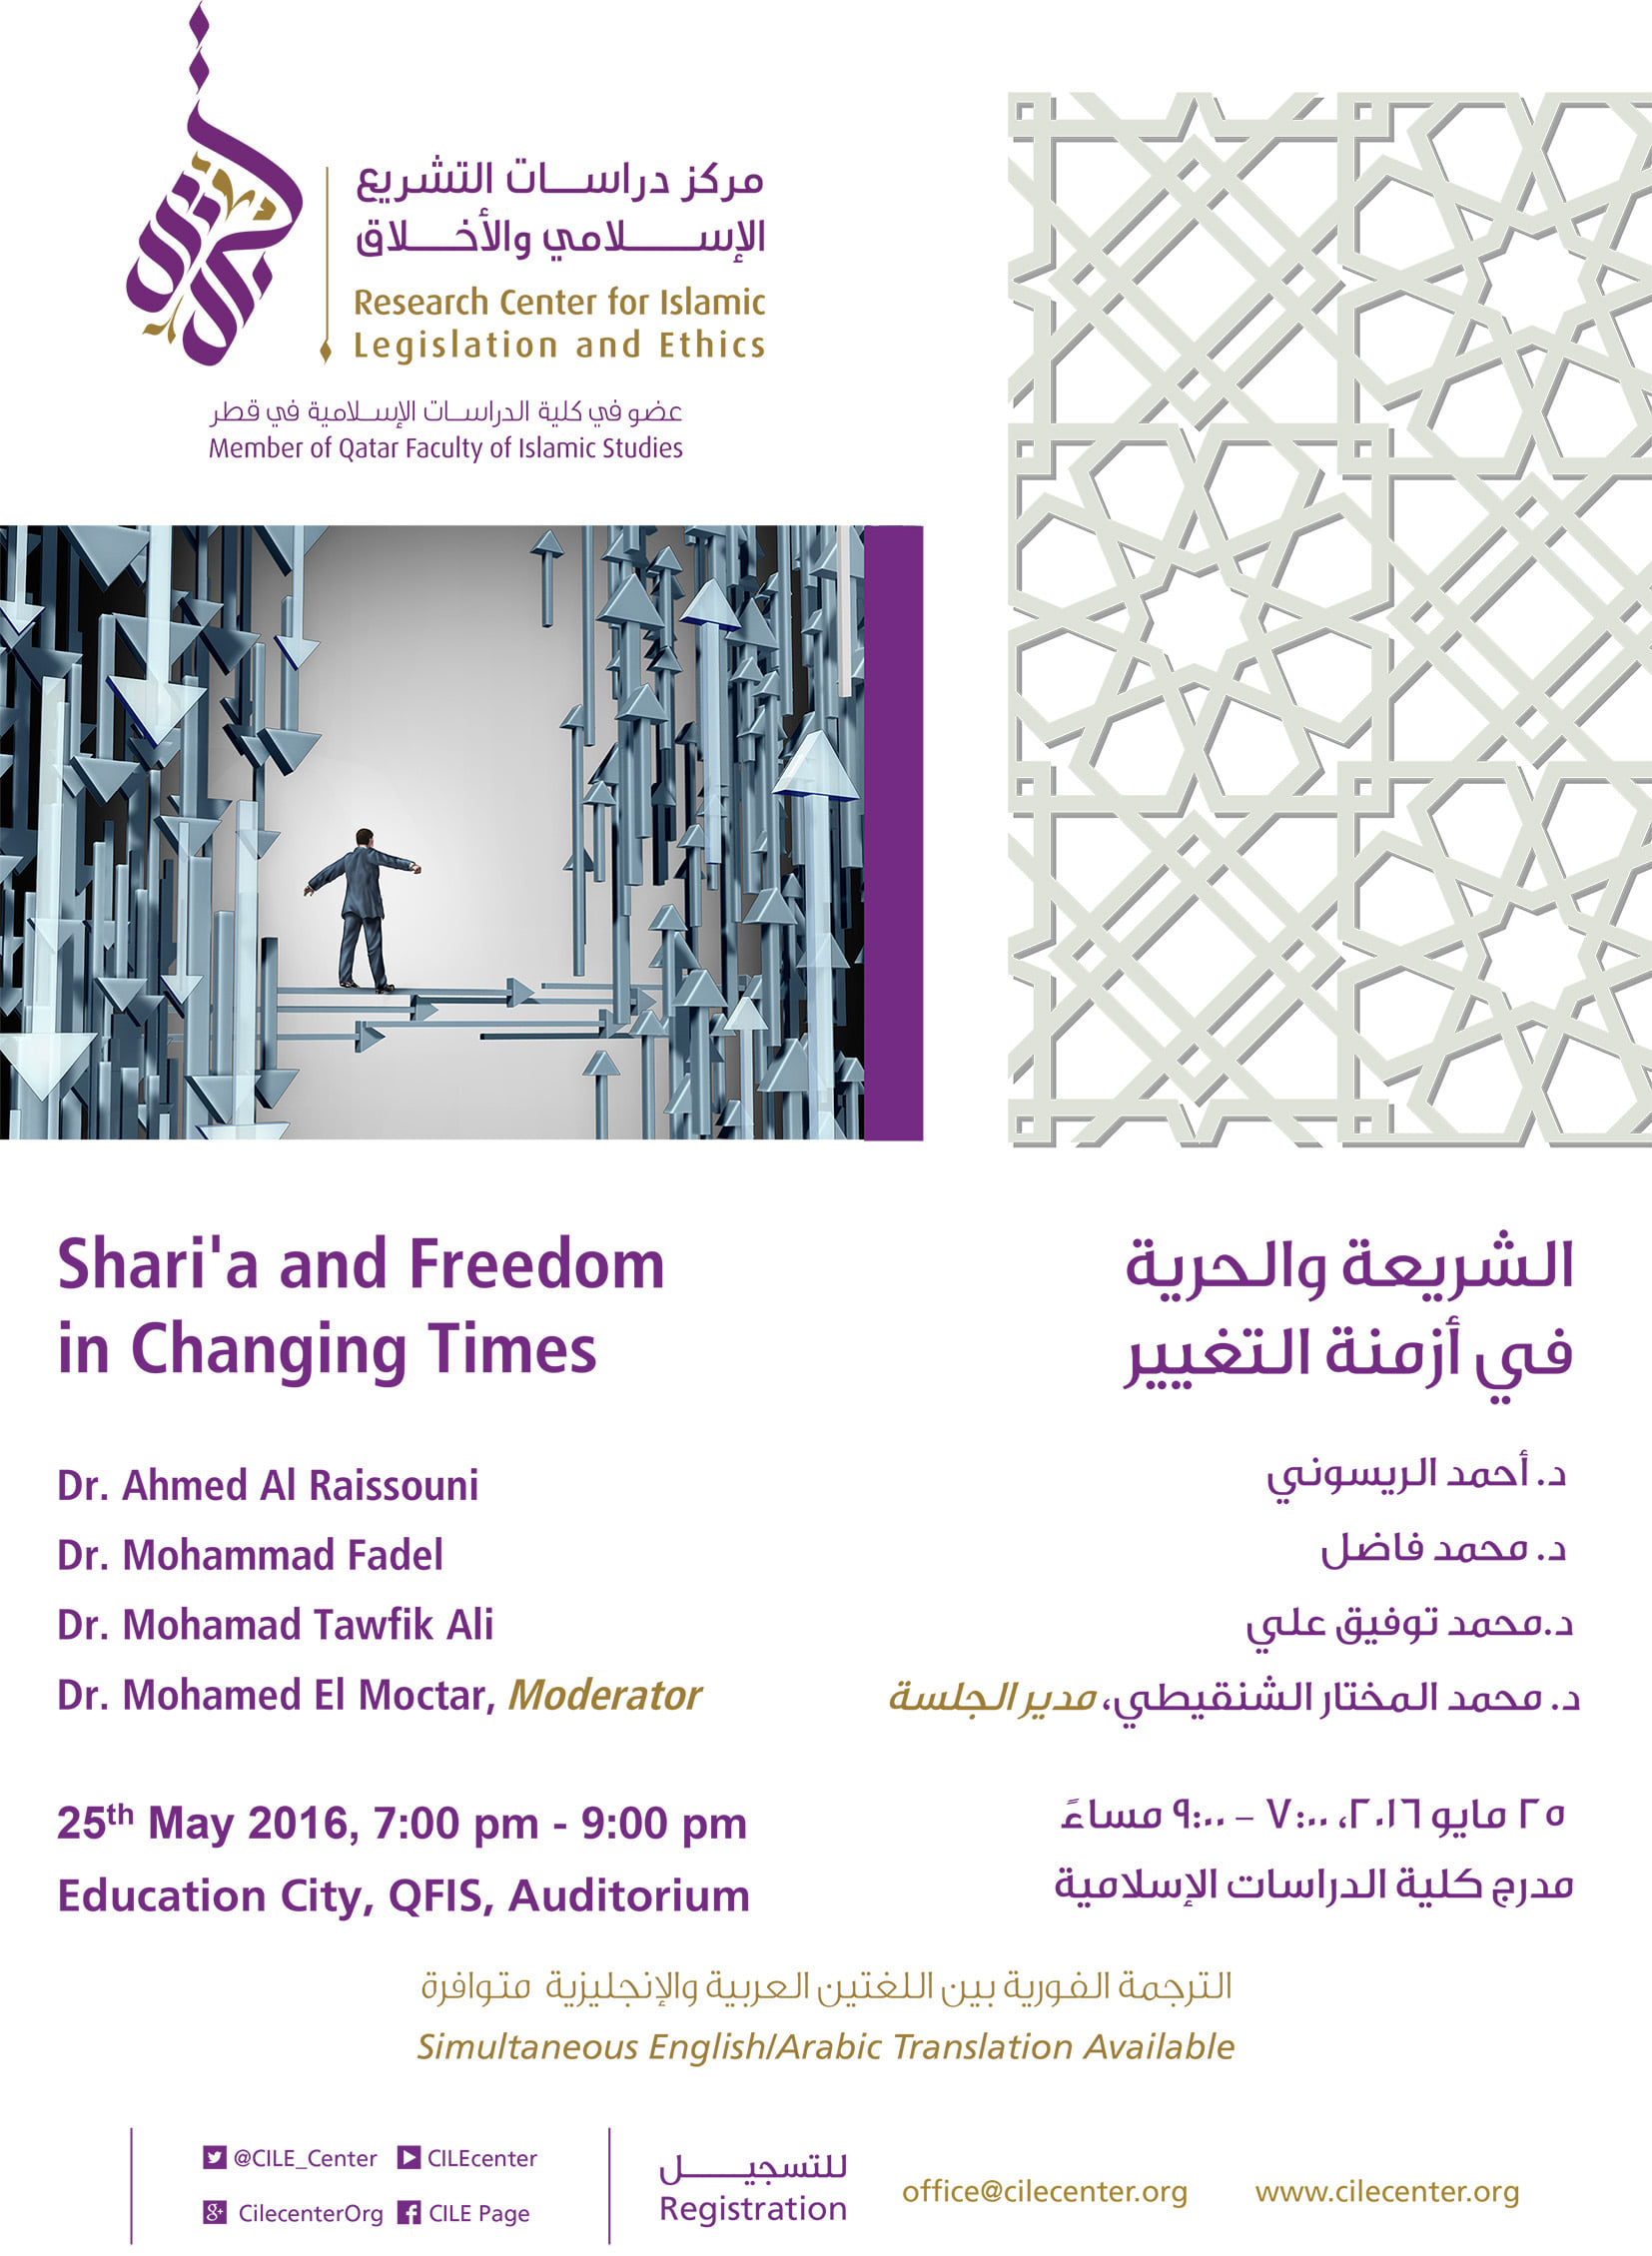 Public Lecture “Shari’a and Freedom in Changing Times”